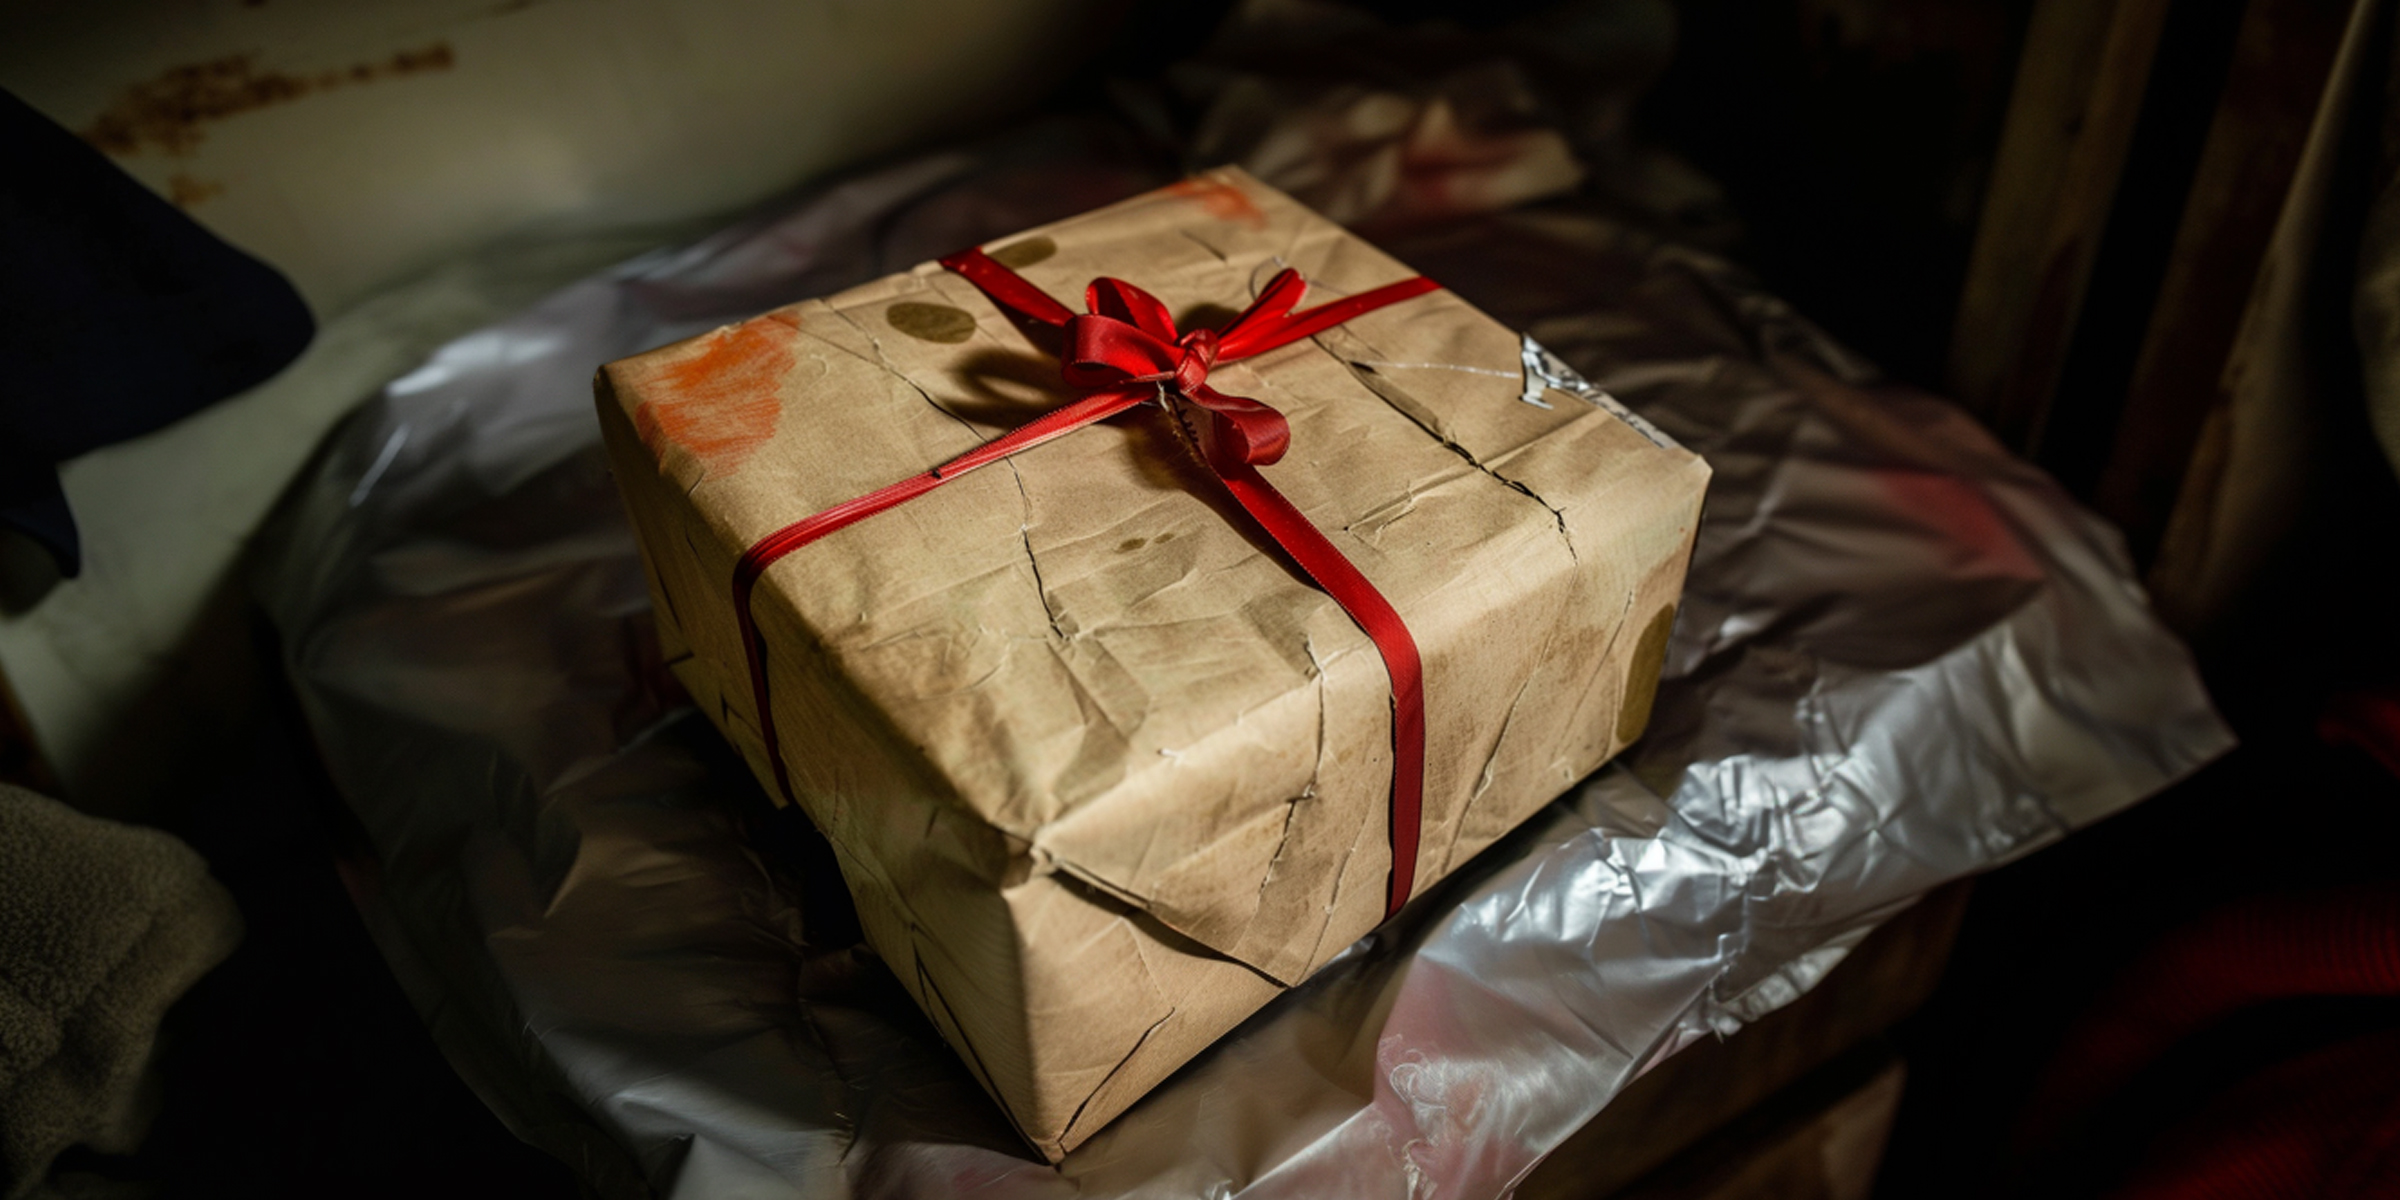 A wrapped package on a table | Source: AmoMama